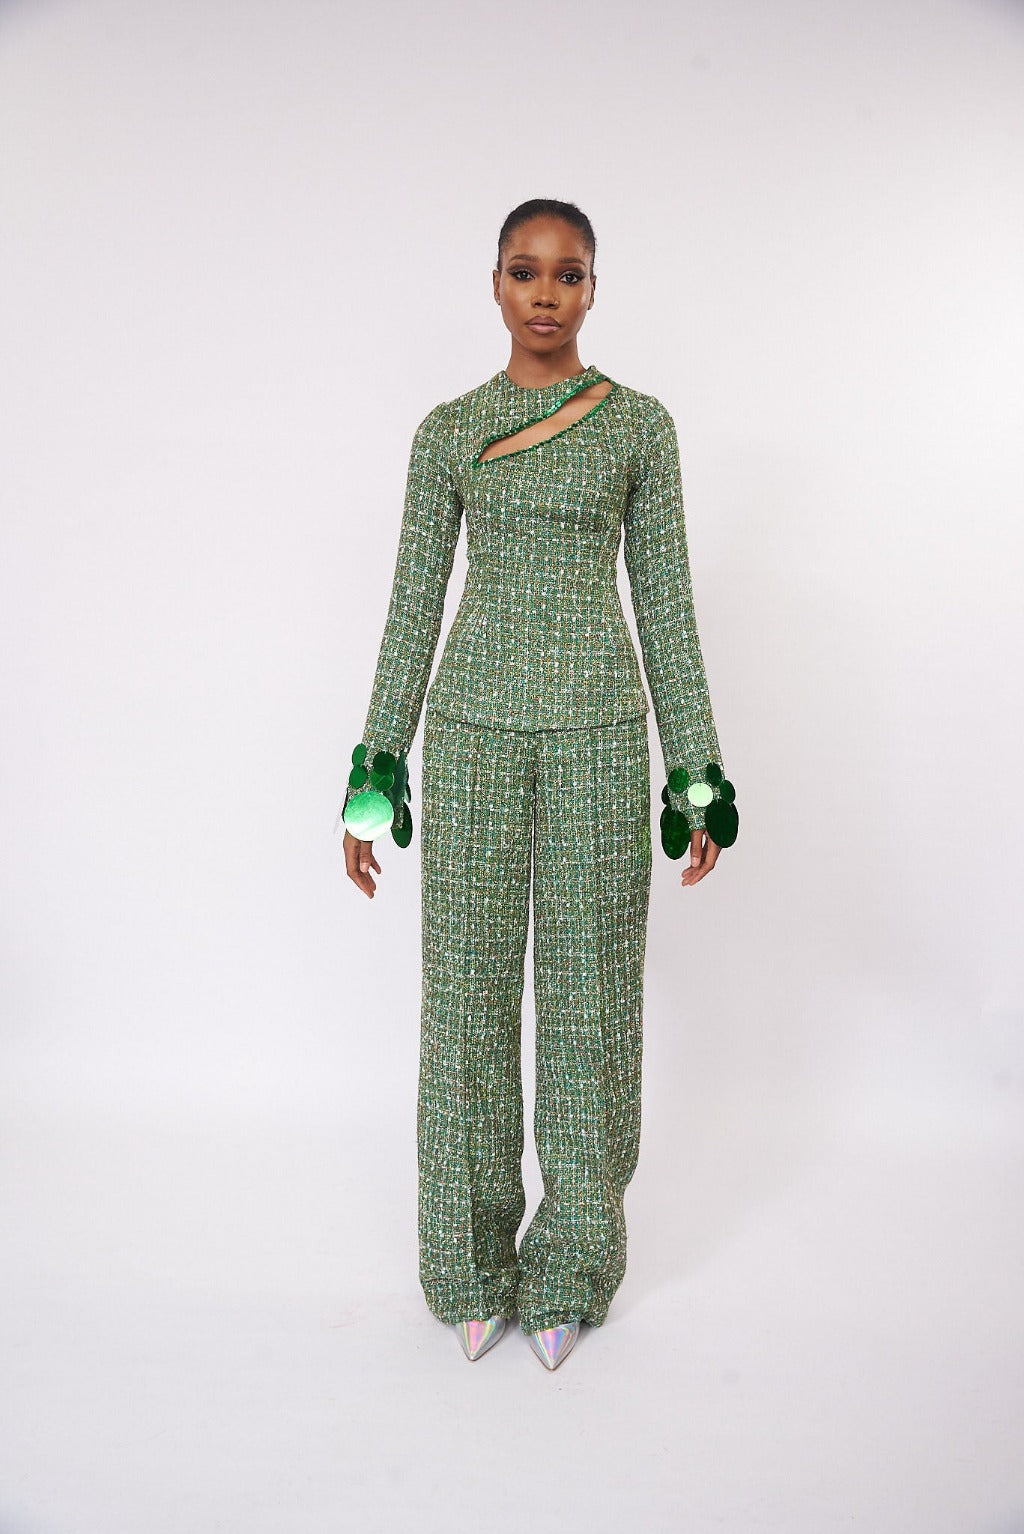 A model wearing a Green top with cut-out neckline detail and sequins embellishment at the neckline and sleeve hem and a Green straight-cut pant